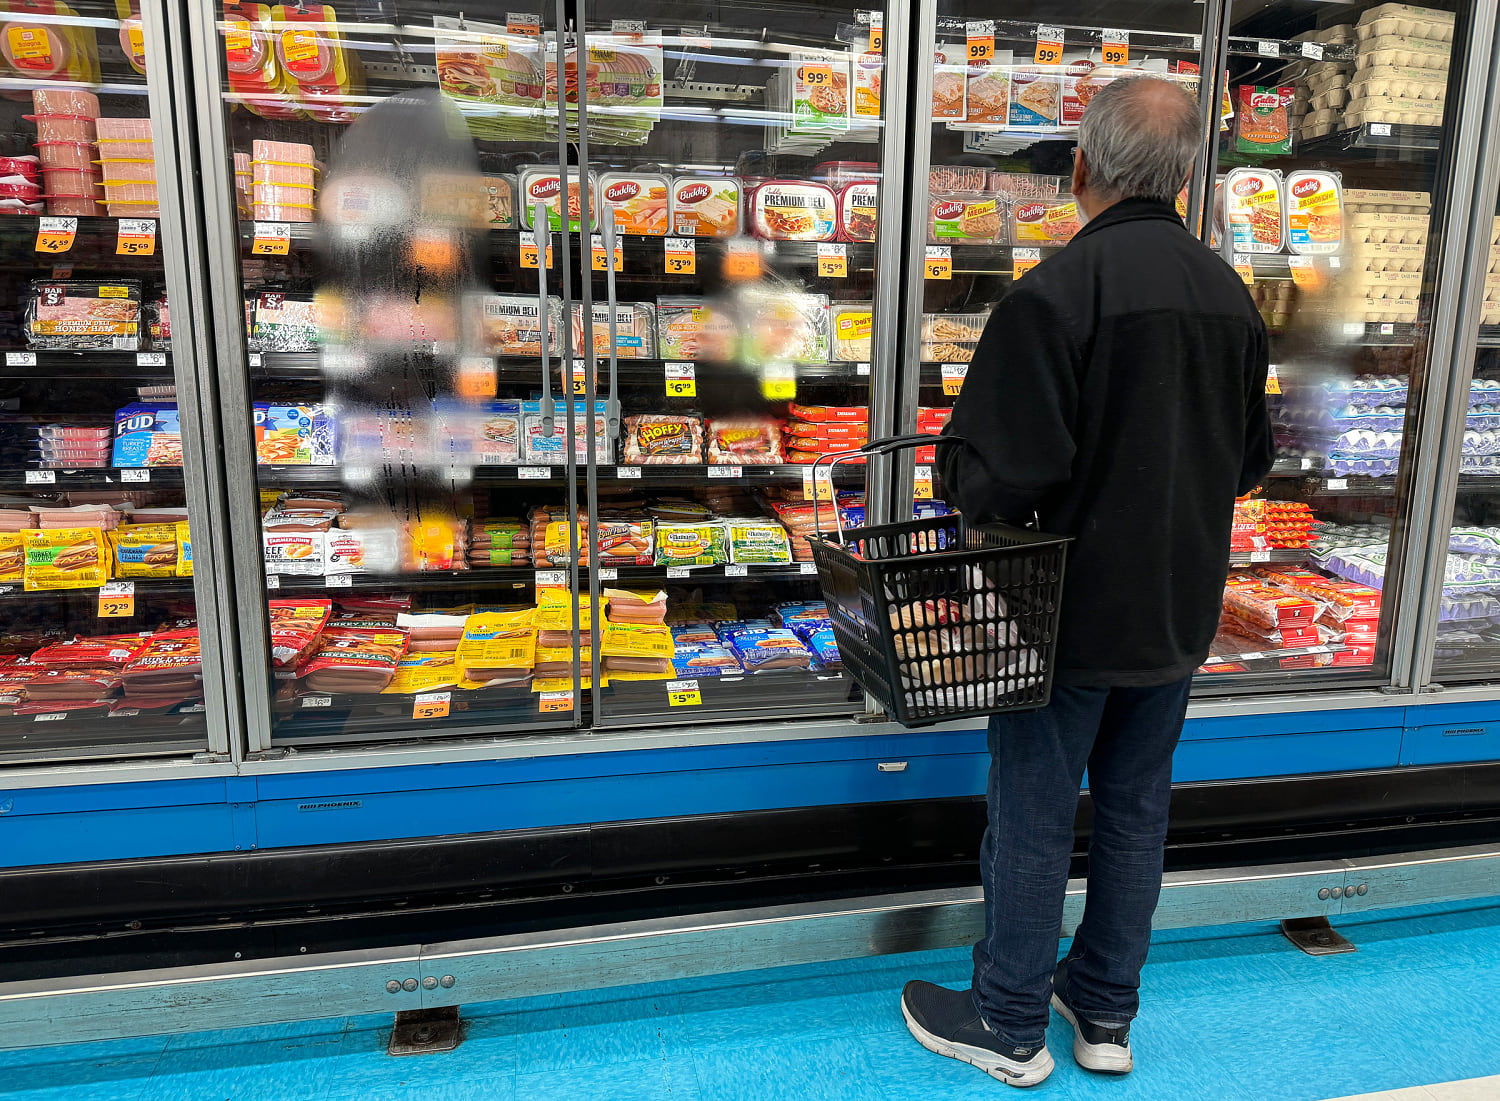 Consumer price growth accelerated in March, adding to cloudy picture for U.S. economy